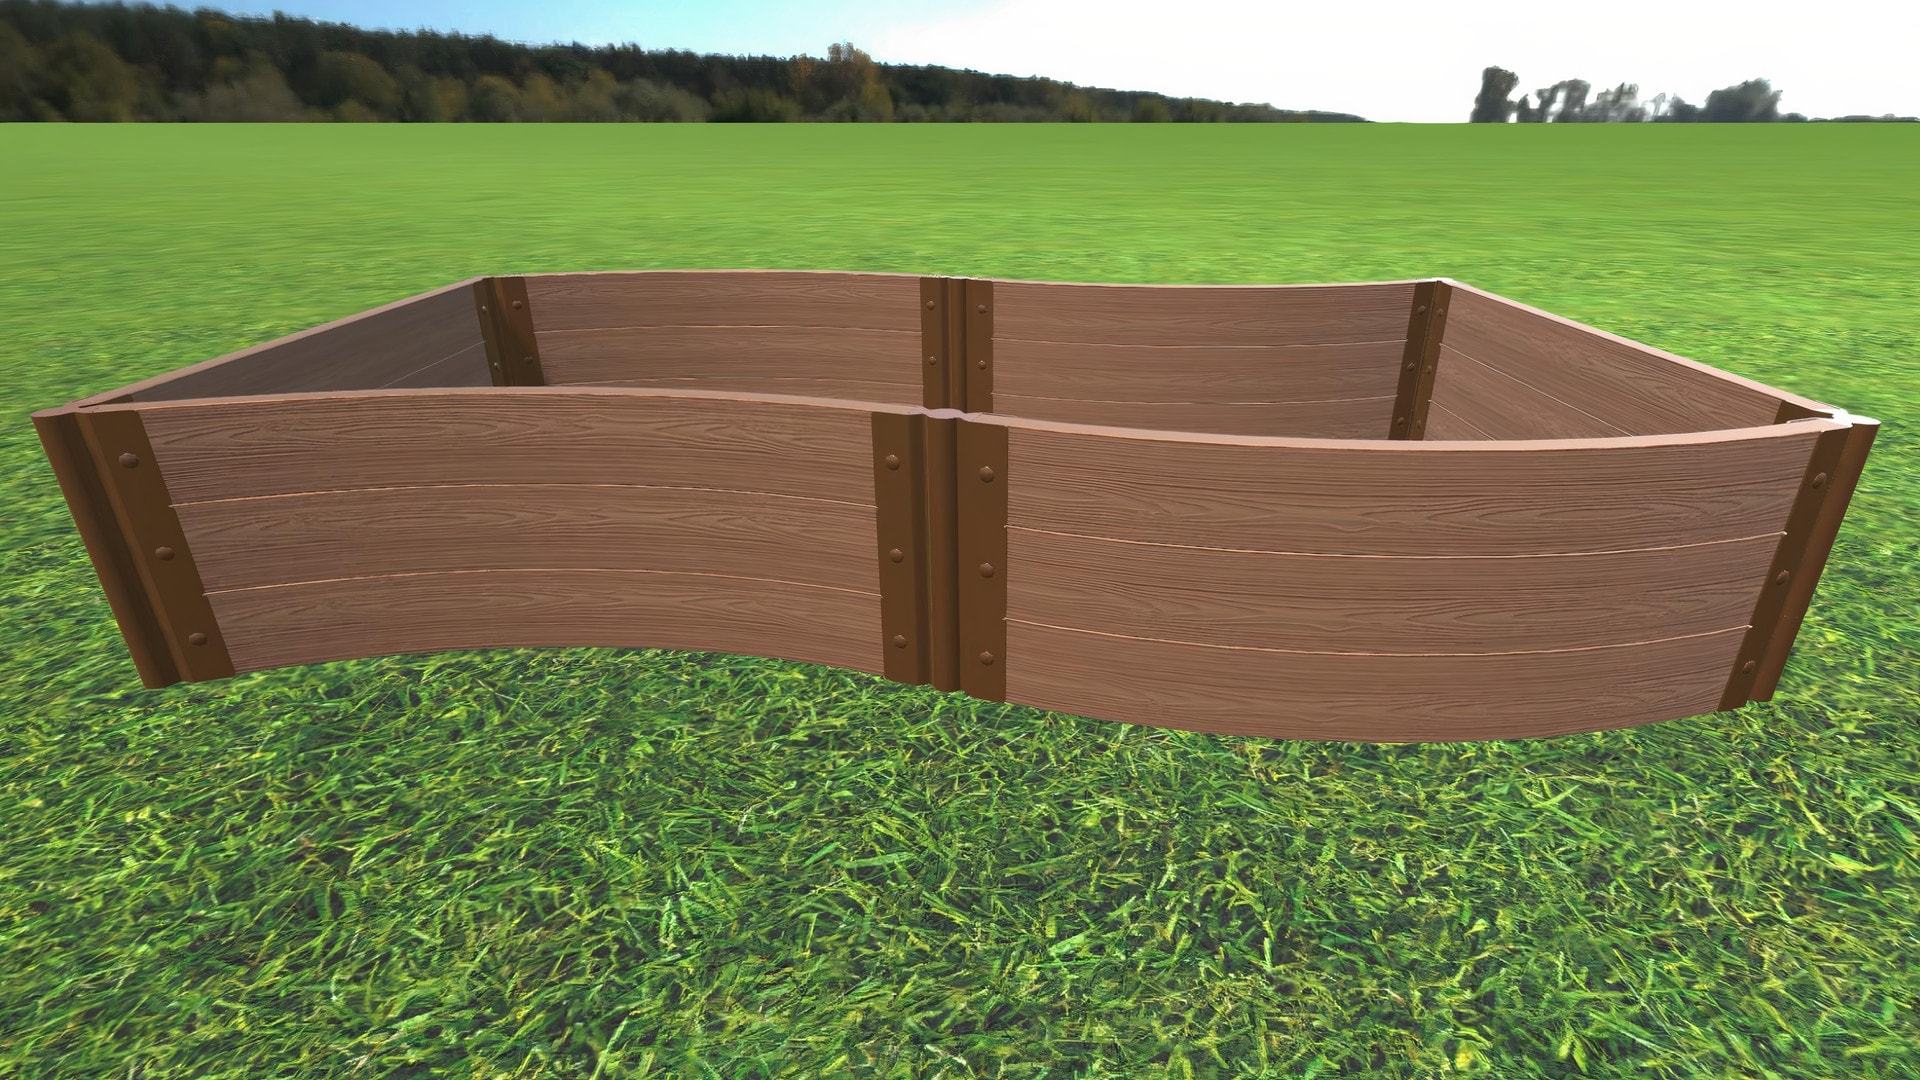 Tool-Free 'Wavy Navy' - 4' x 8' Raised Garden Bed Raised Garden Beds Frame It All Classic Sienna 2" 3 = 16.5"